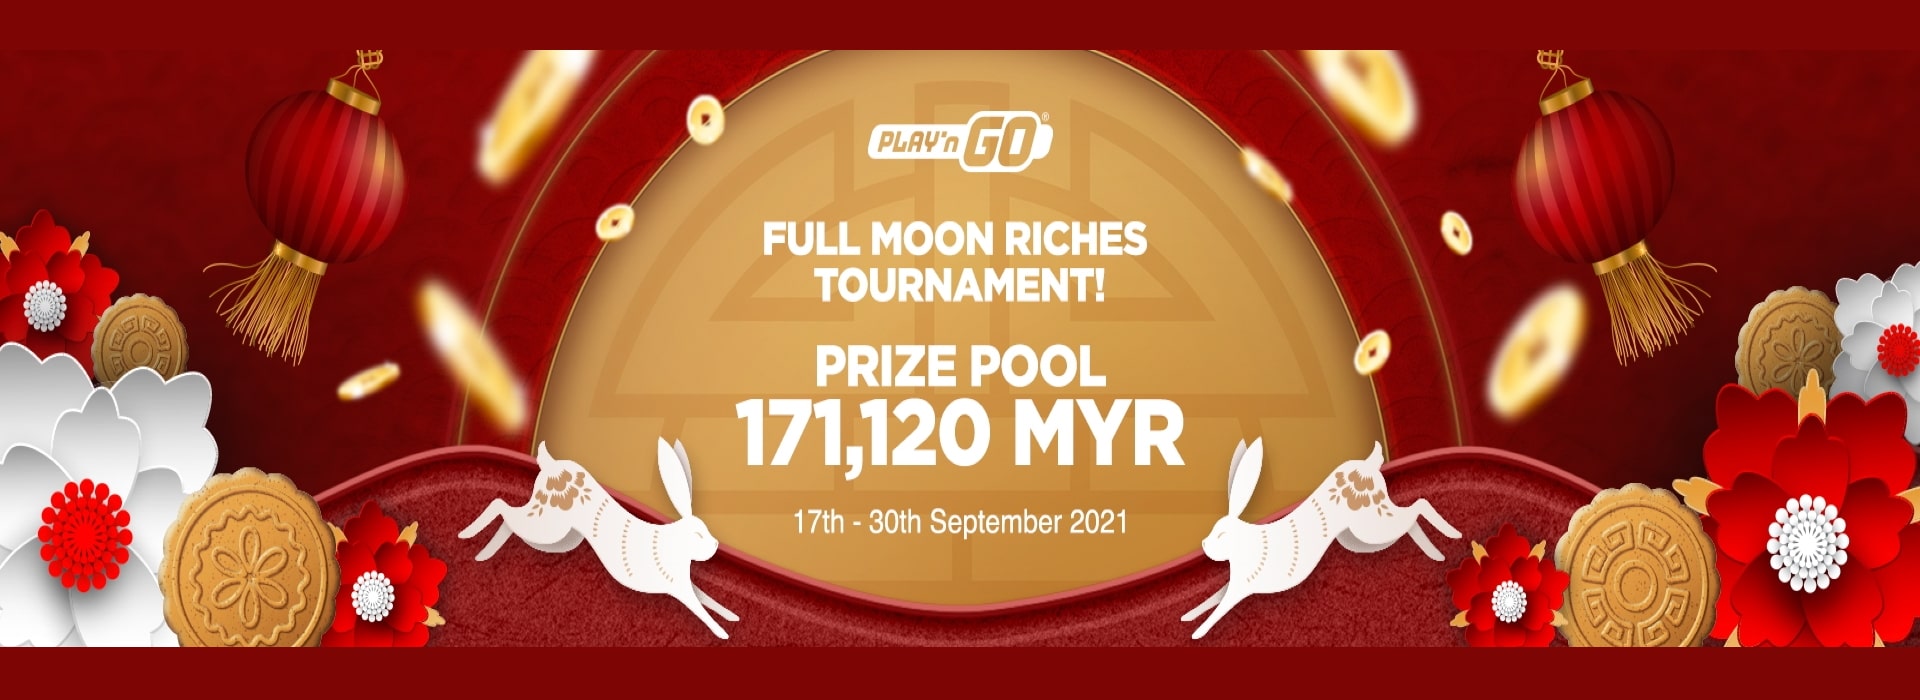 PNG 2021 Full Moon Riches Network Tournament